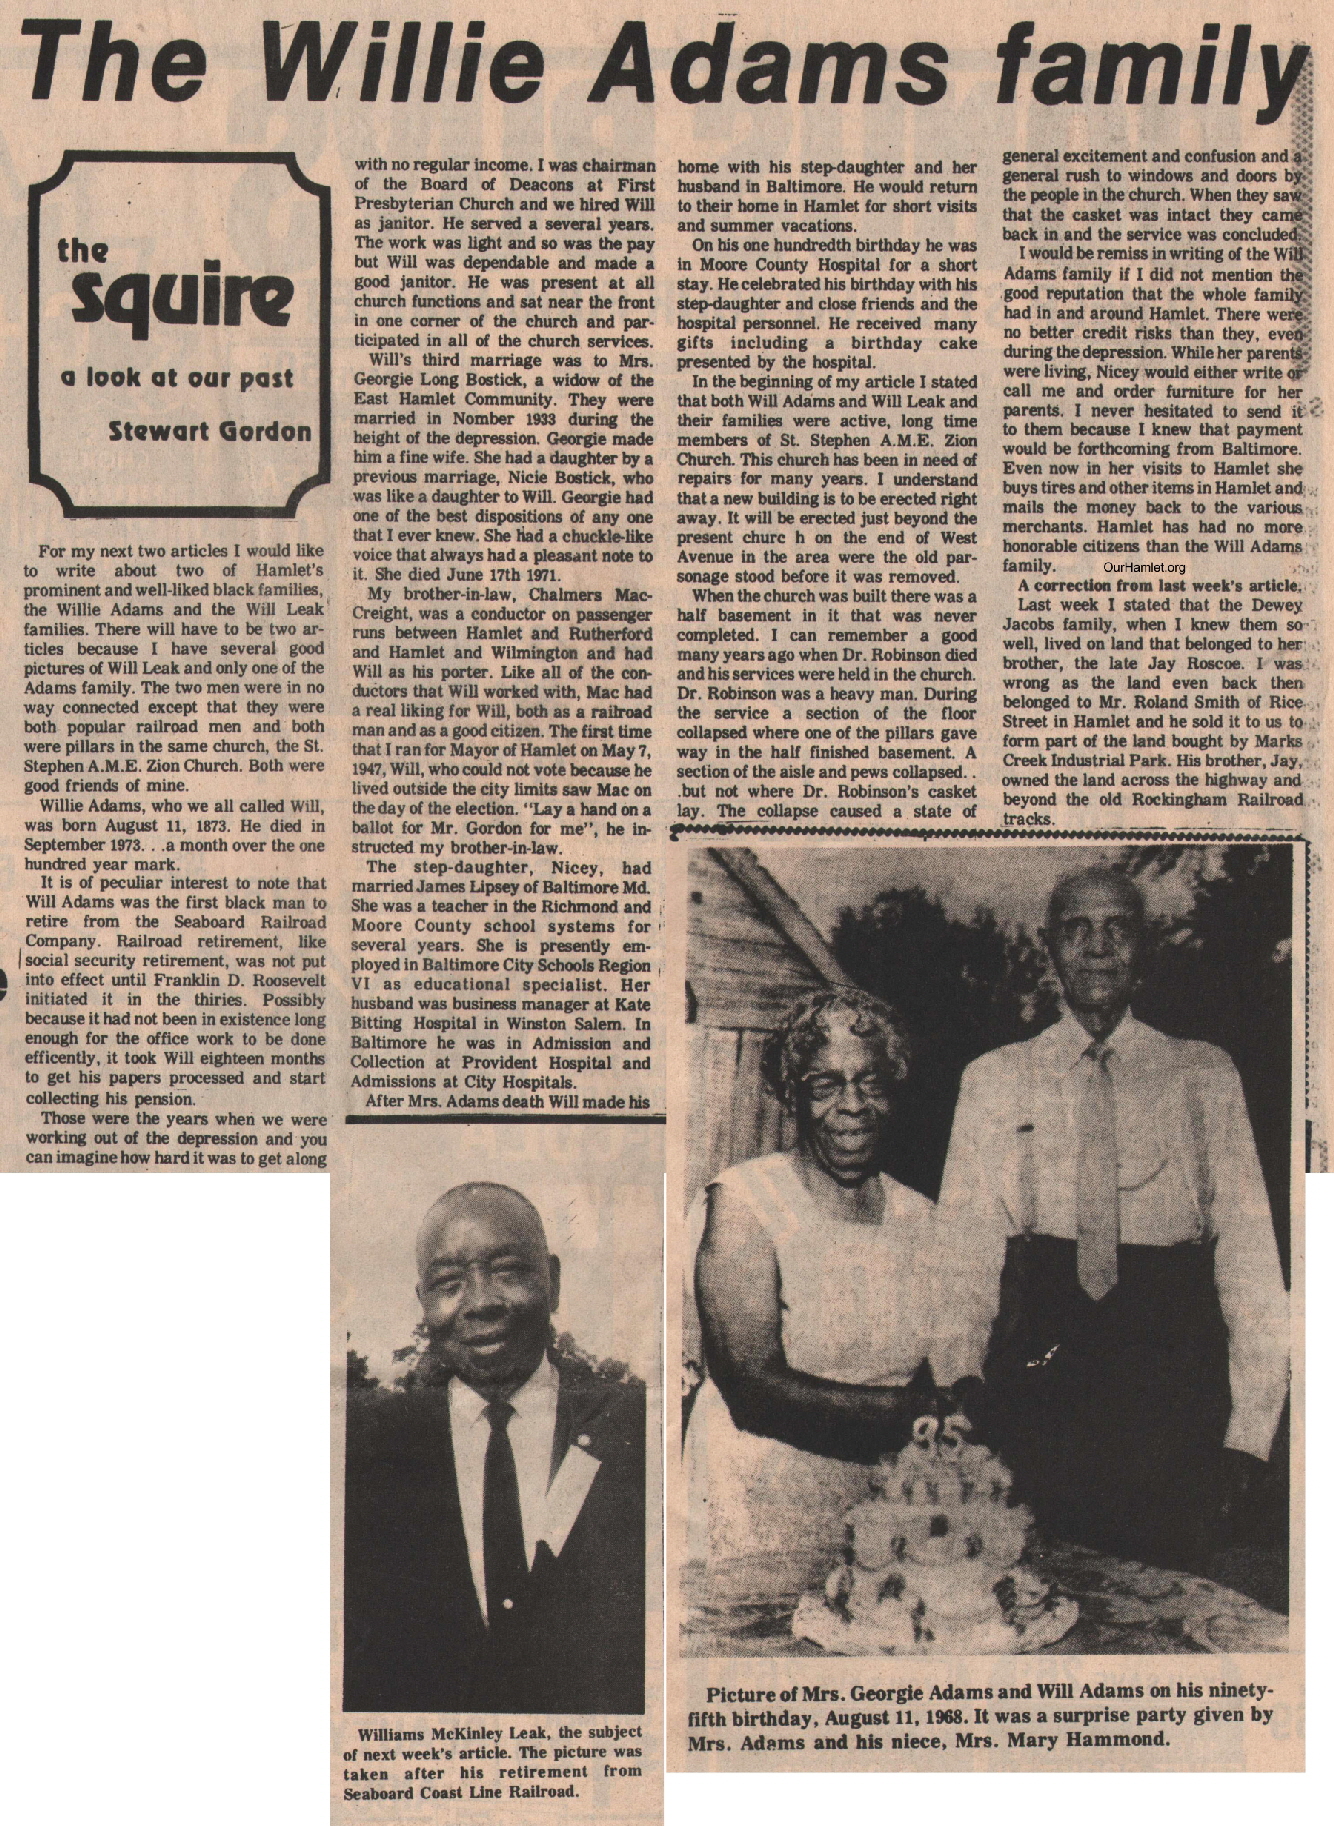 The Squire - Willie Adams Family OH